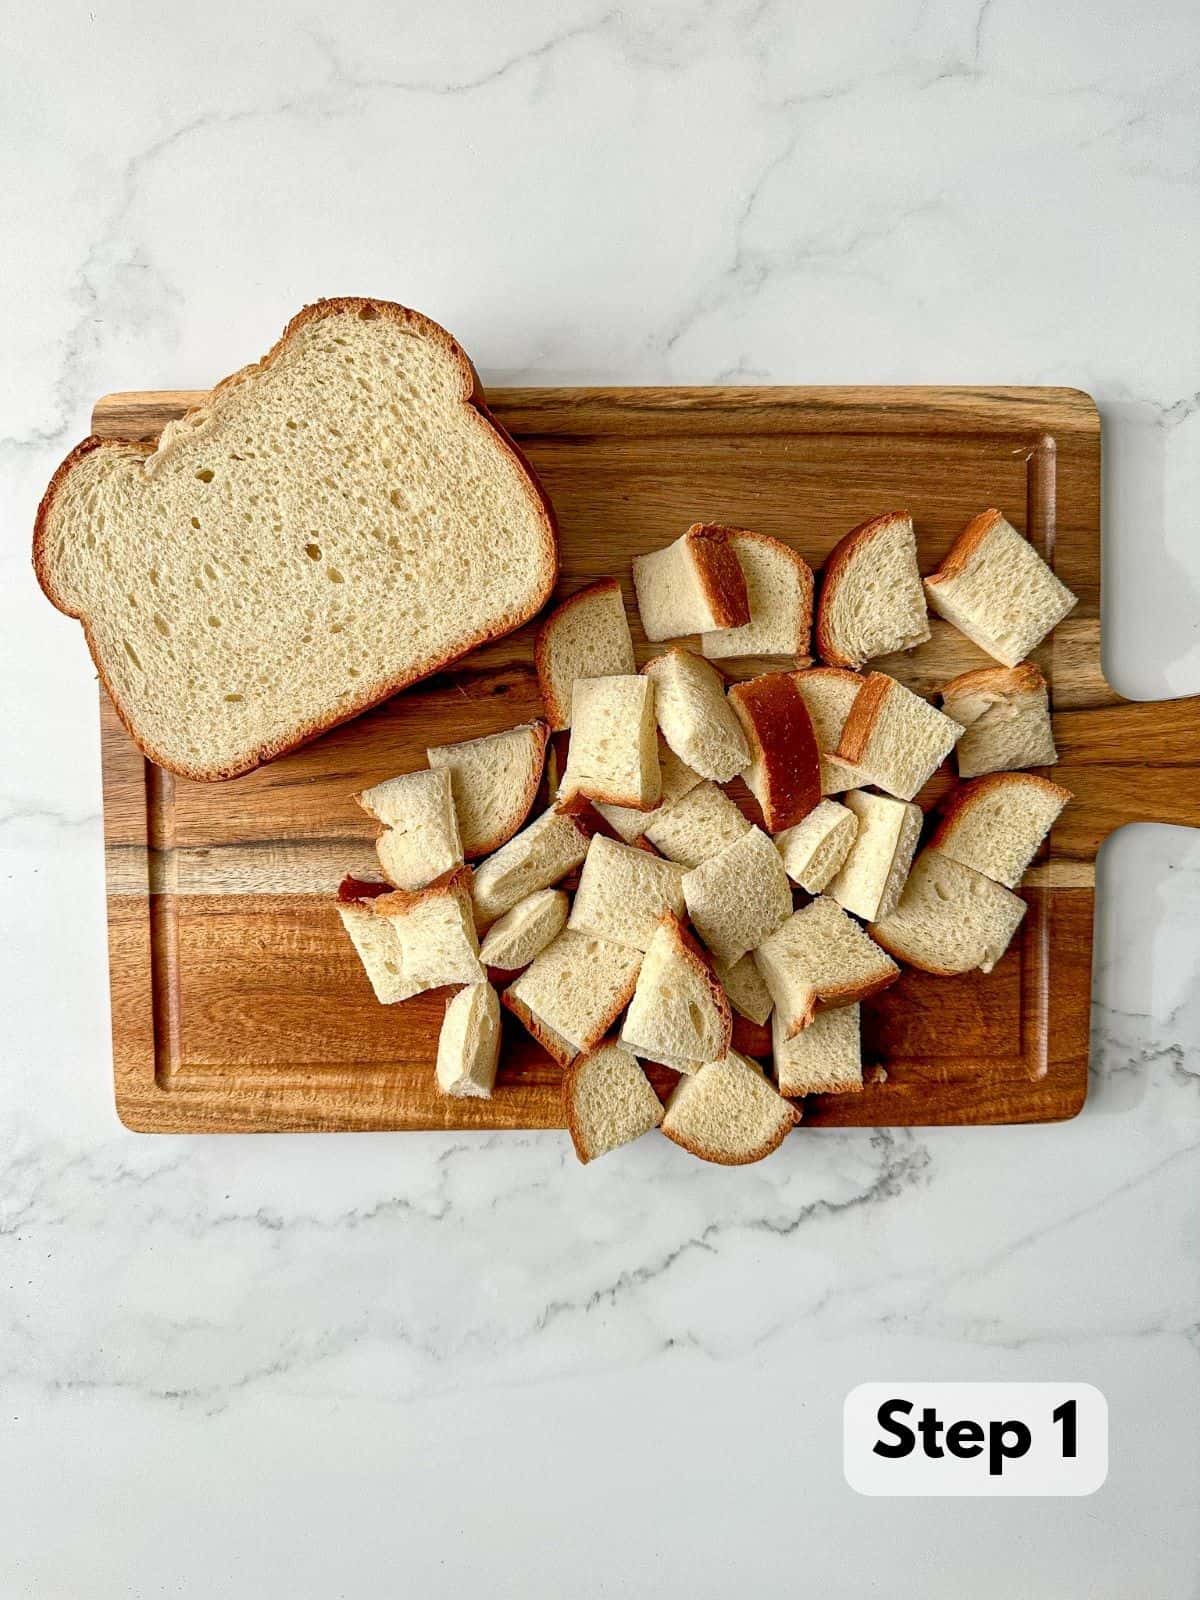 Slices of brioche bread and bread cubes chopped into 1-inch wide pieces on a wooden cutting board.